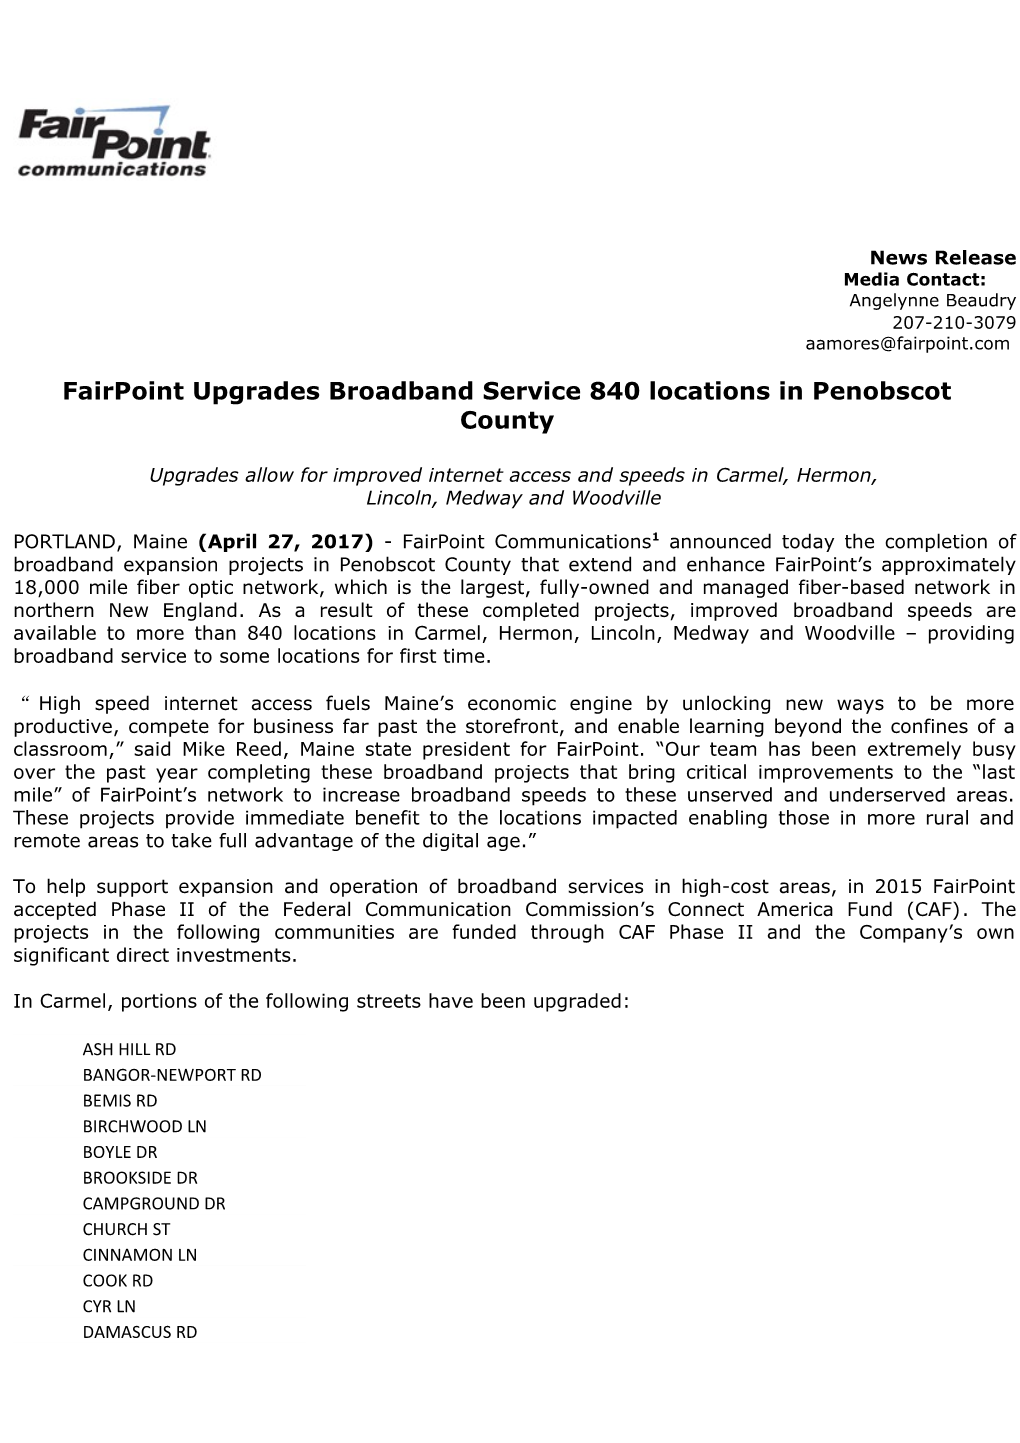 Fairpoint Upgrades Broadband Service 840 Locations in Penobscot County